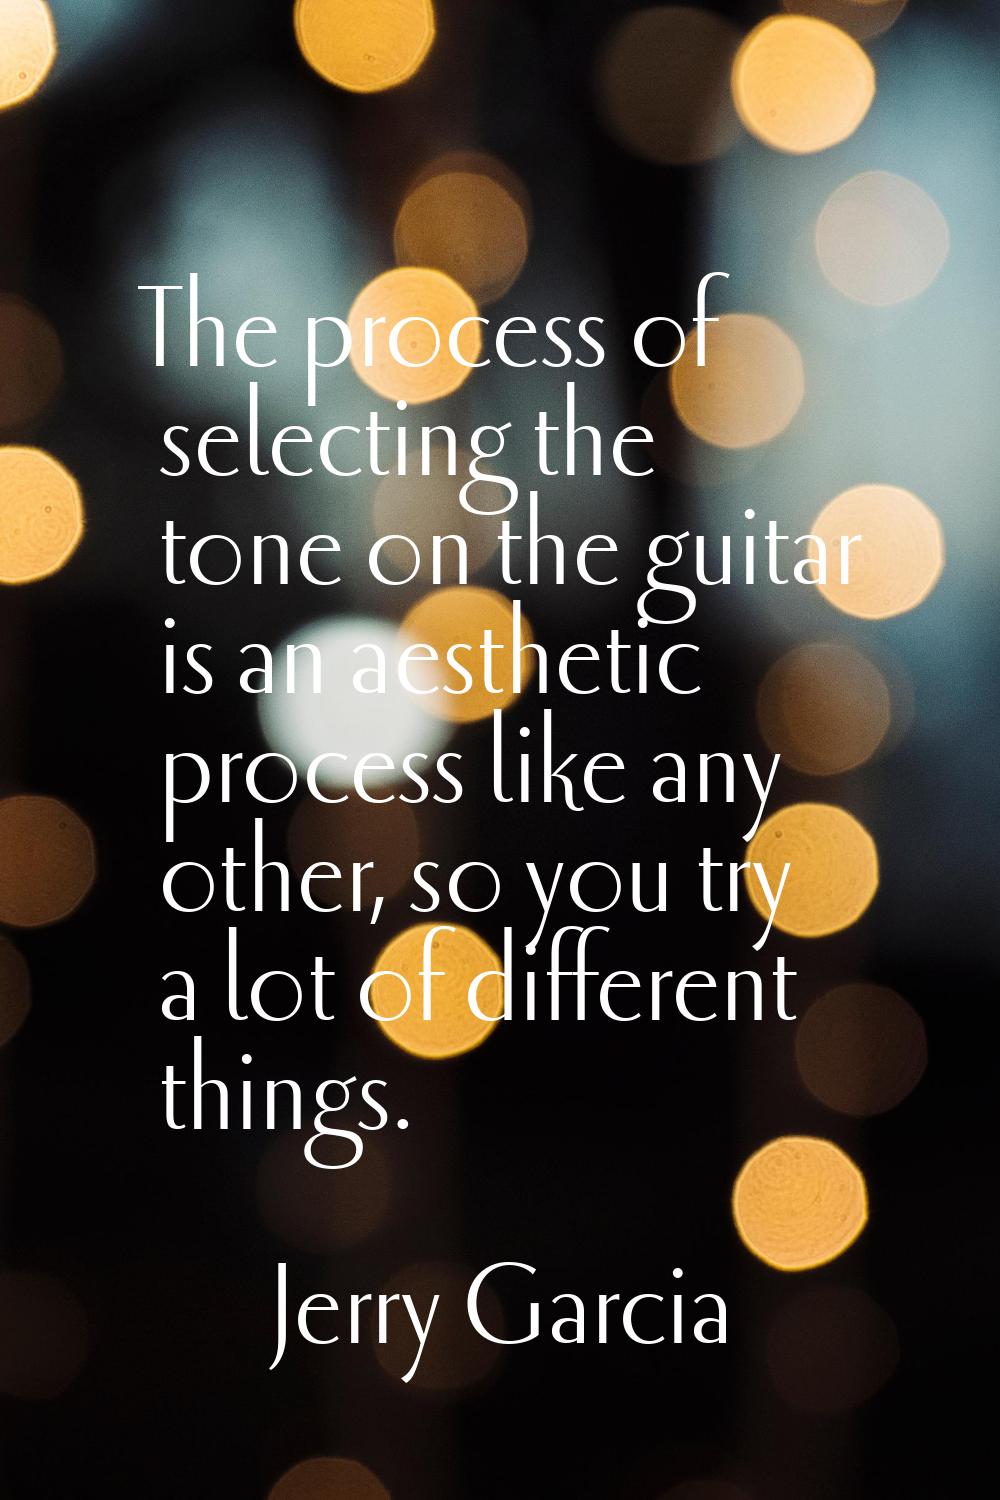 The process of selecting the tone on the guitar is an aesthetic process like any other, so you try 